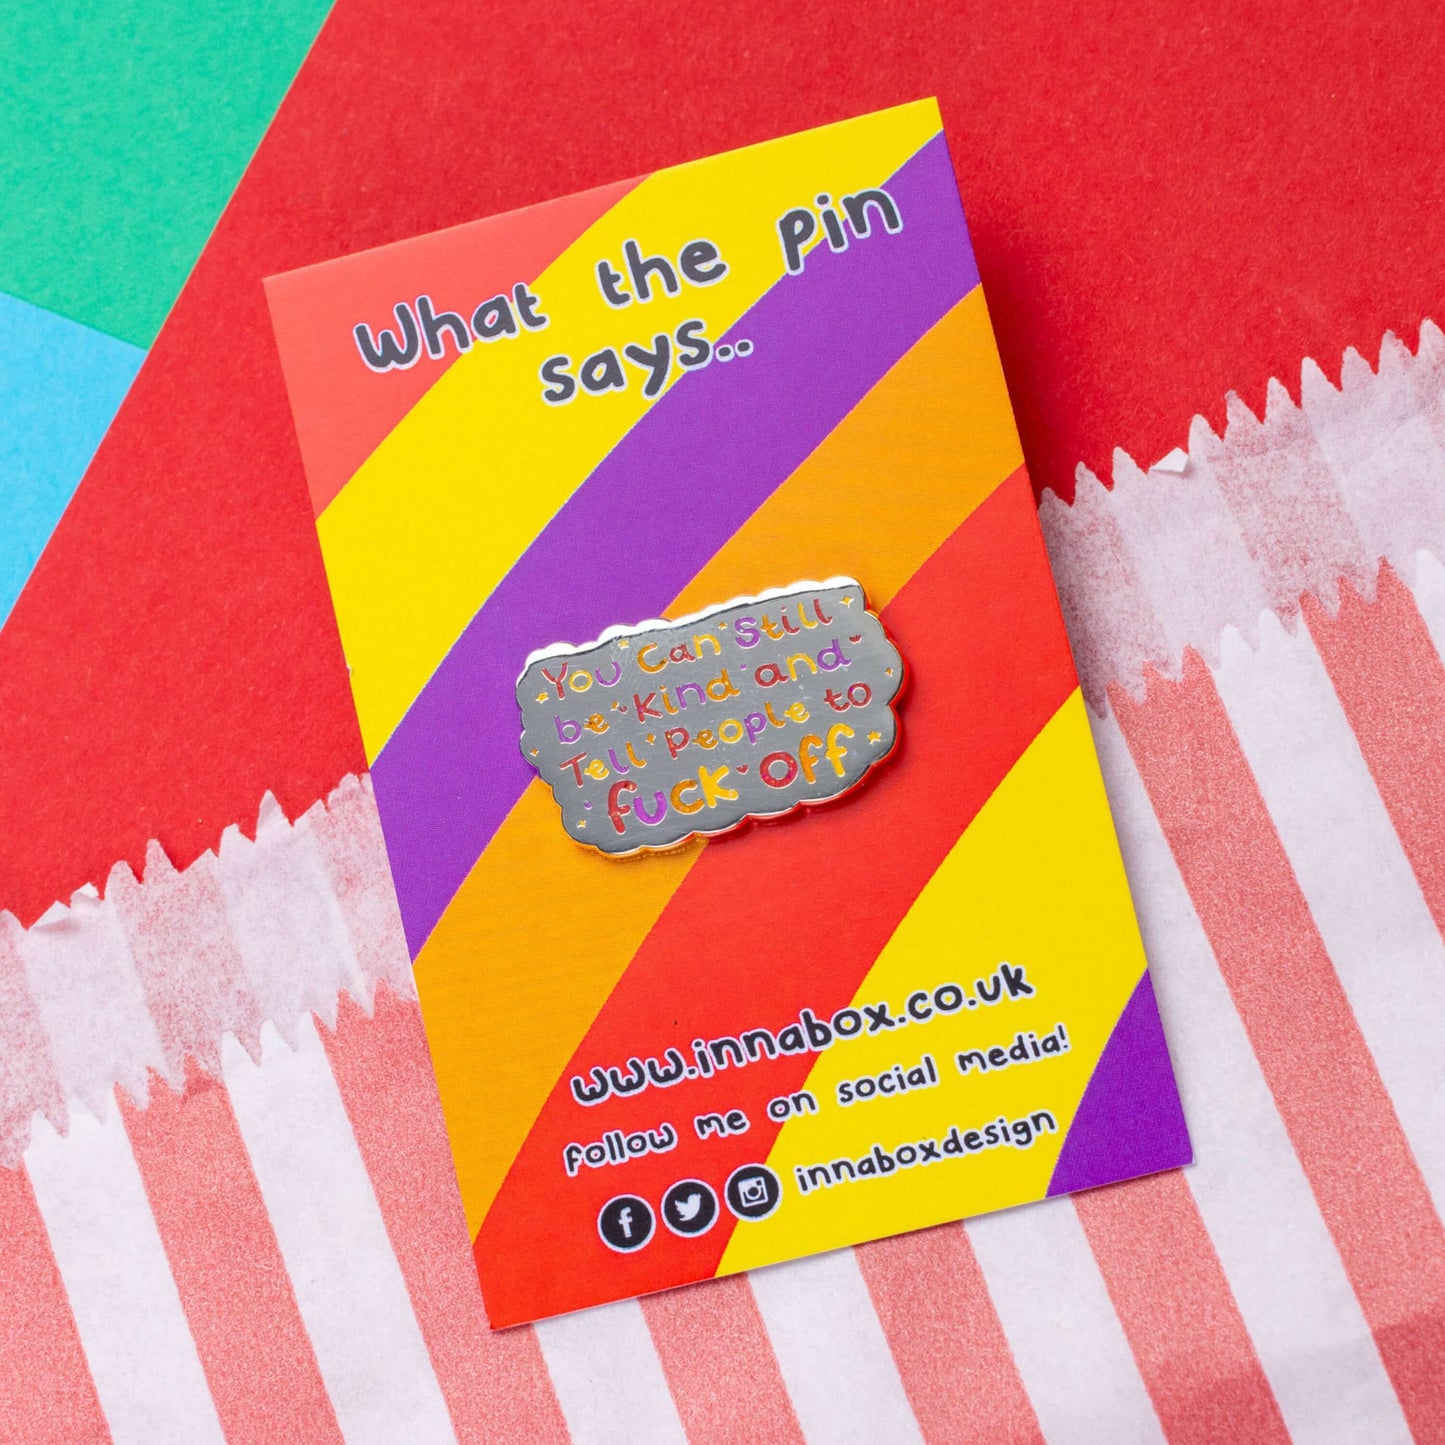 The You Can Still be Kind and Tell People to F**k Off Enamel Pin on red, yellow, purple and orange stripe backing card with top text reading 'what the pin says..' laid on a red, blue and green card background. The shiny silver enamel pin has rainbow writing reading 'you can still be kind and tell people to fuck off' with multicoloured sparkles, dots and stars.